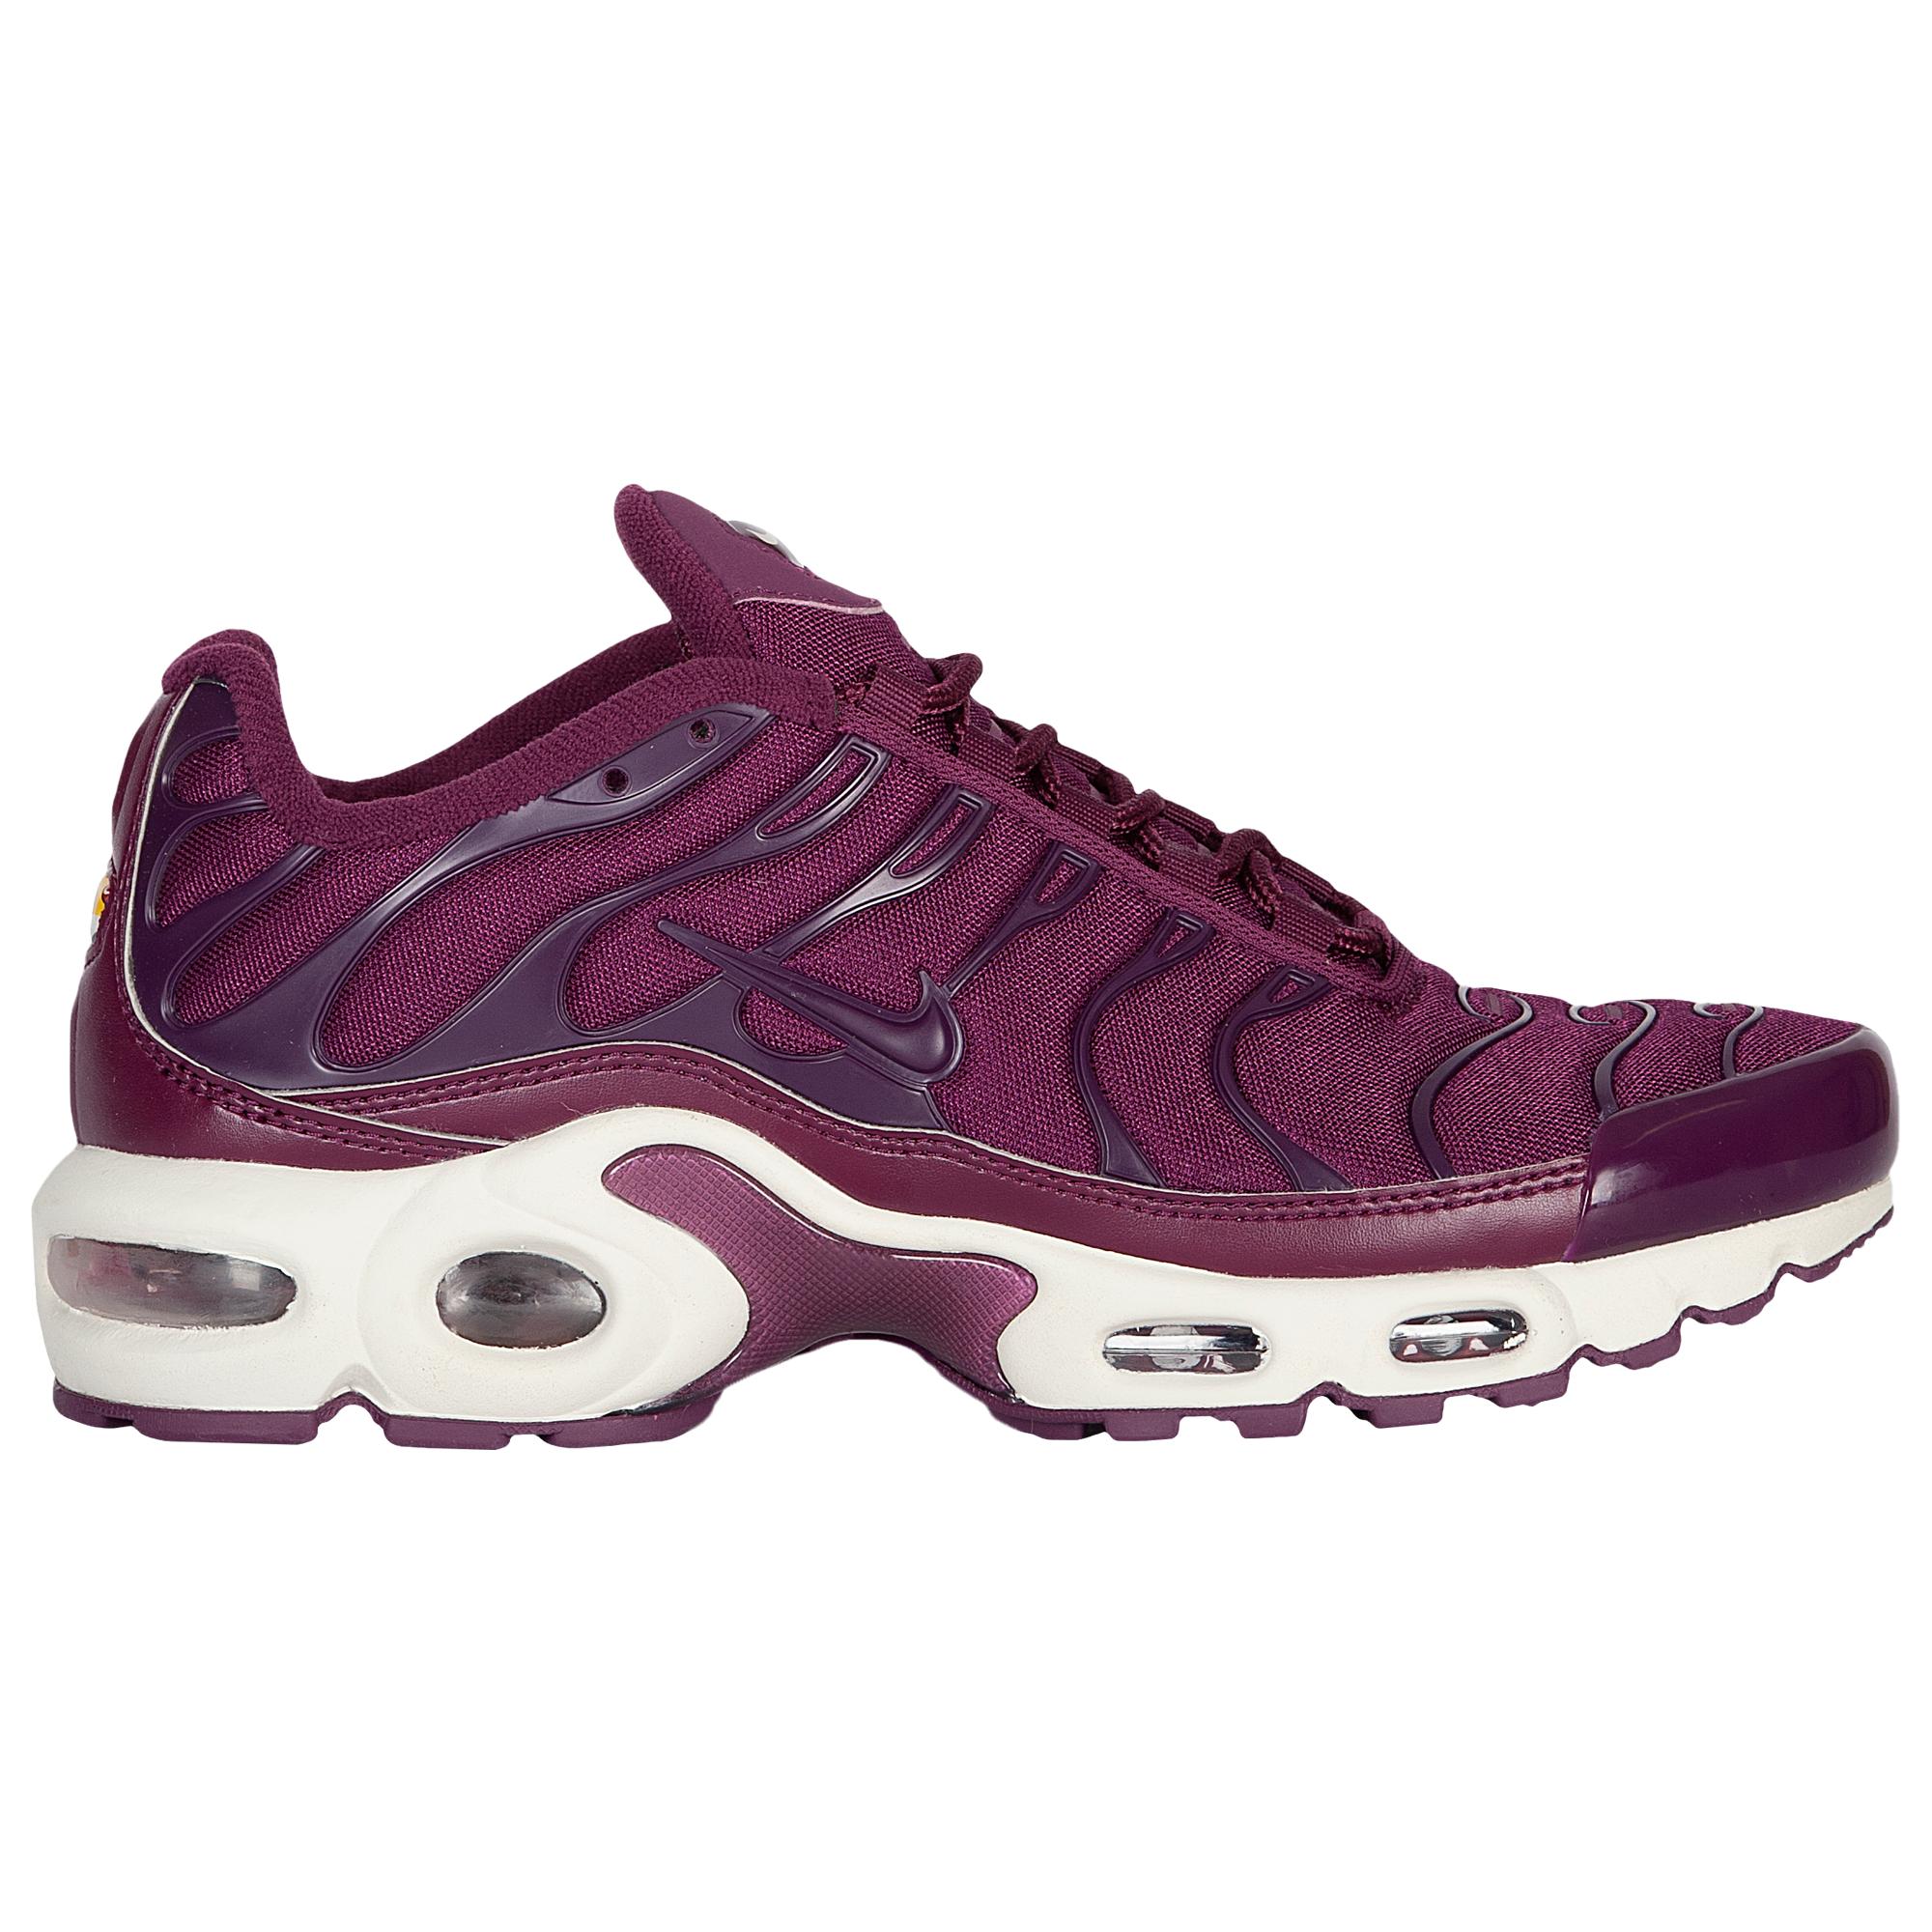 Nike Synthetic Wmns Air Max Plus Tn in 